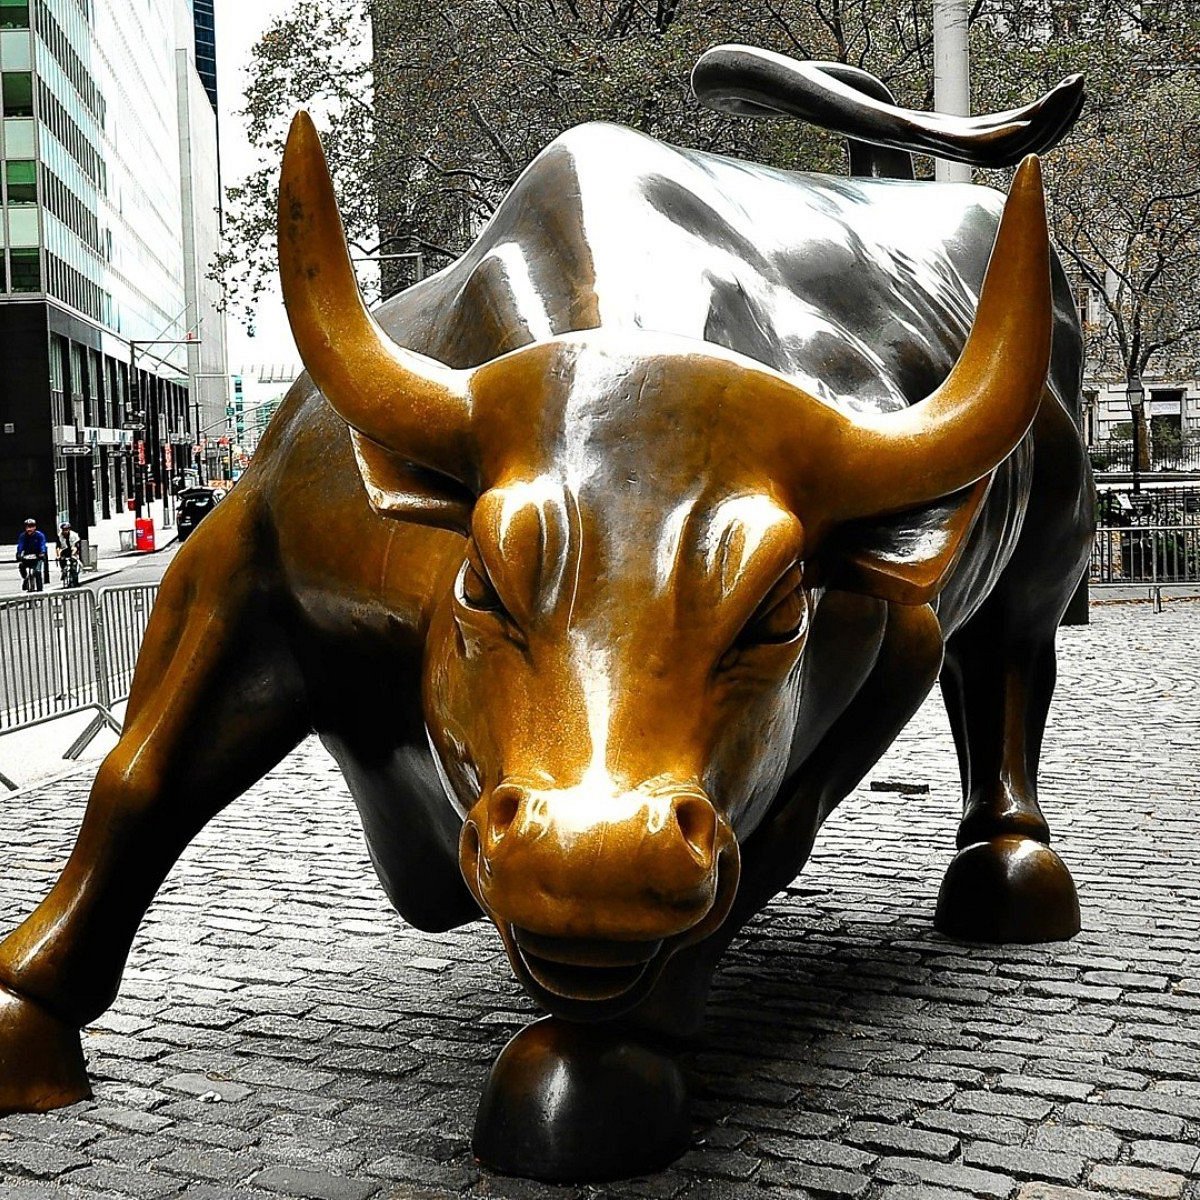 Charging Bull (Wall Street Bull) (New York City) - All You Need to ...